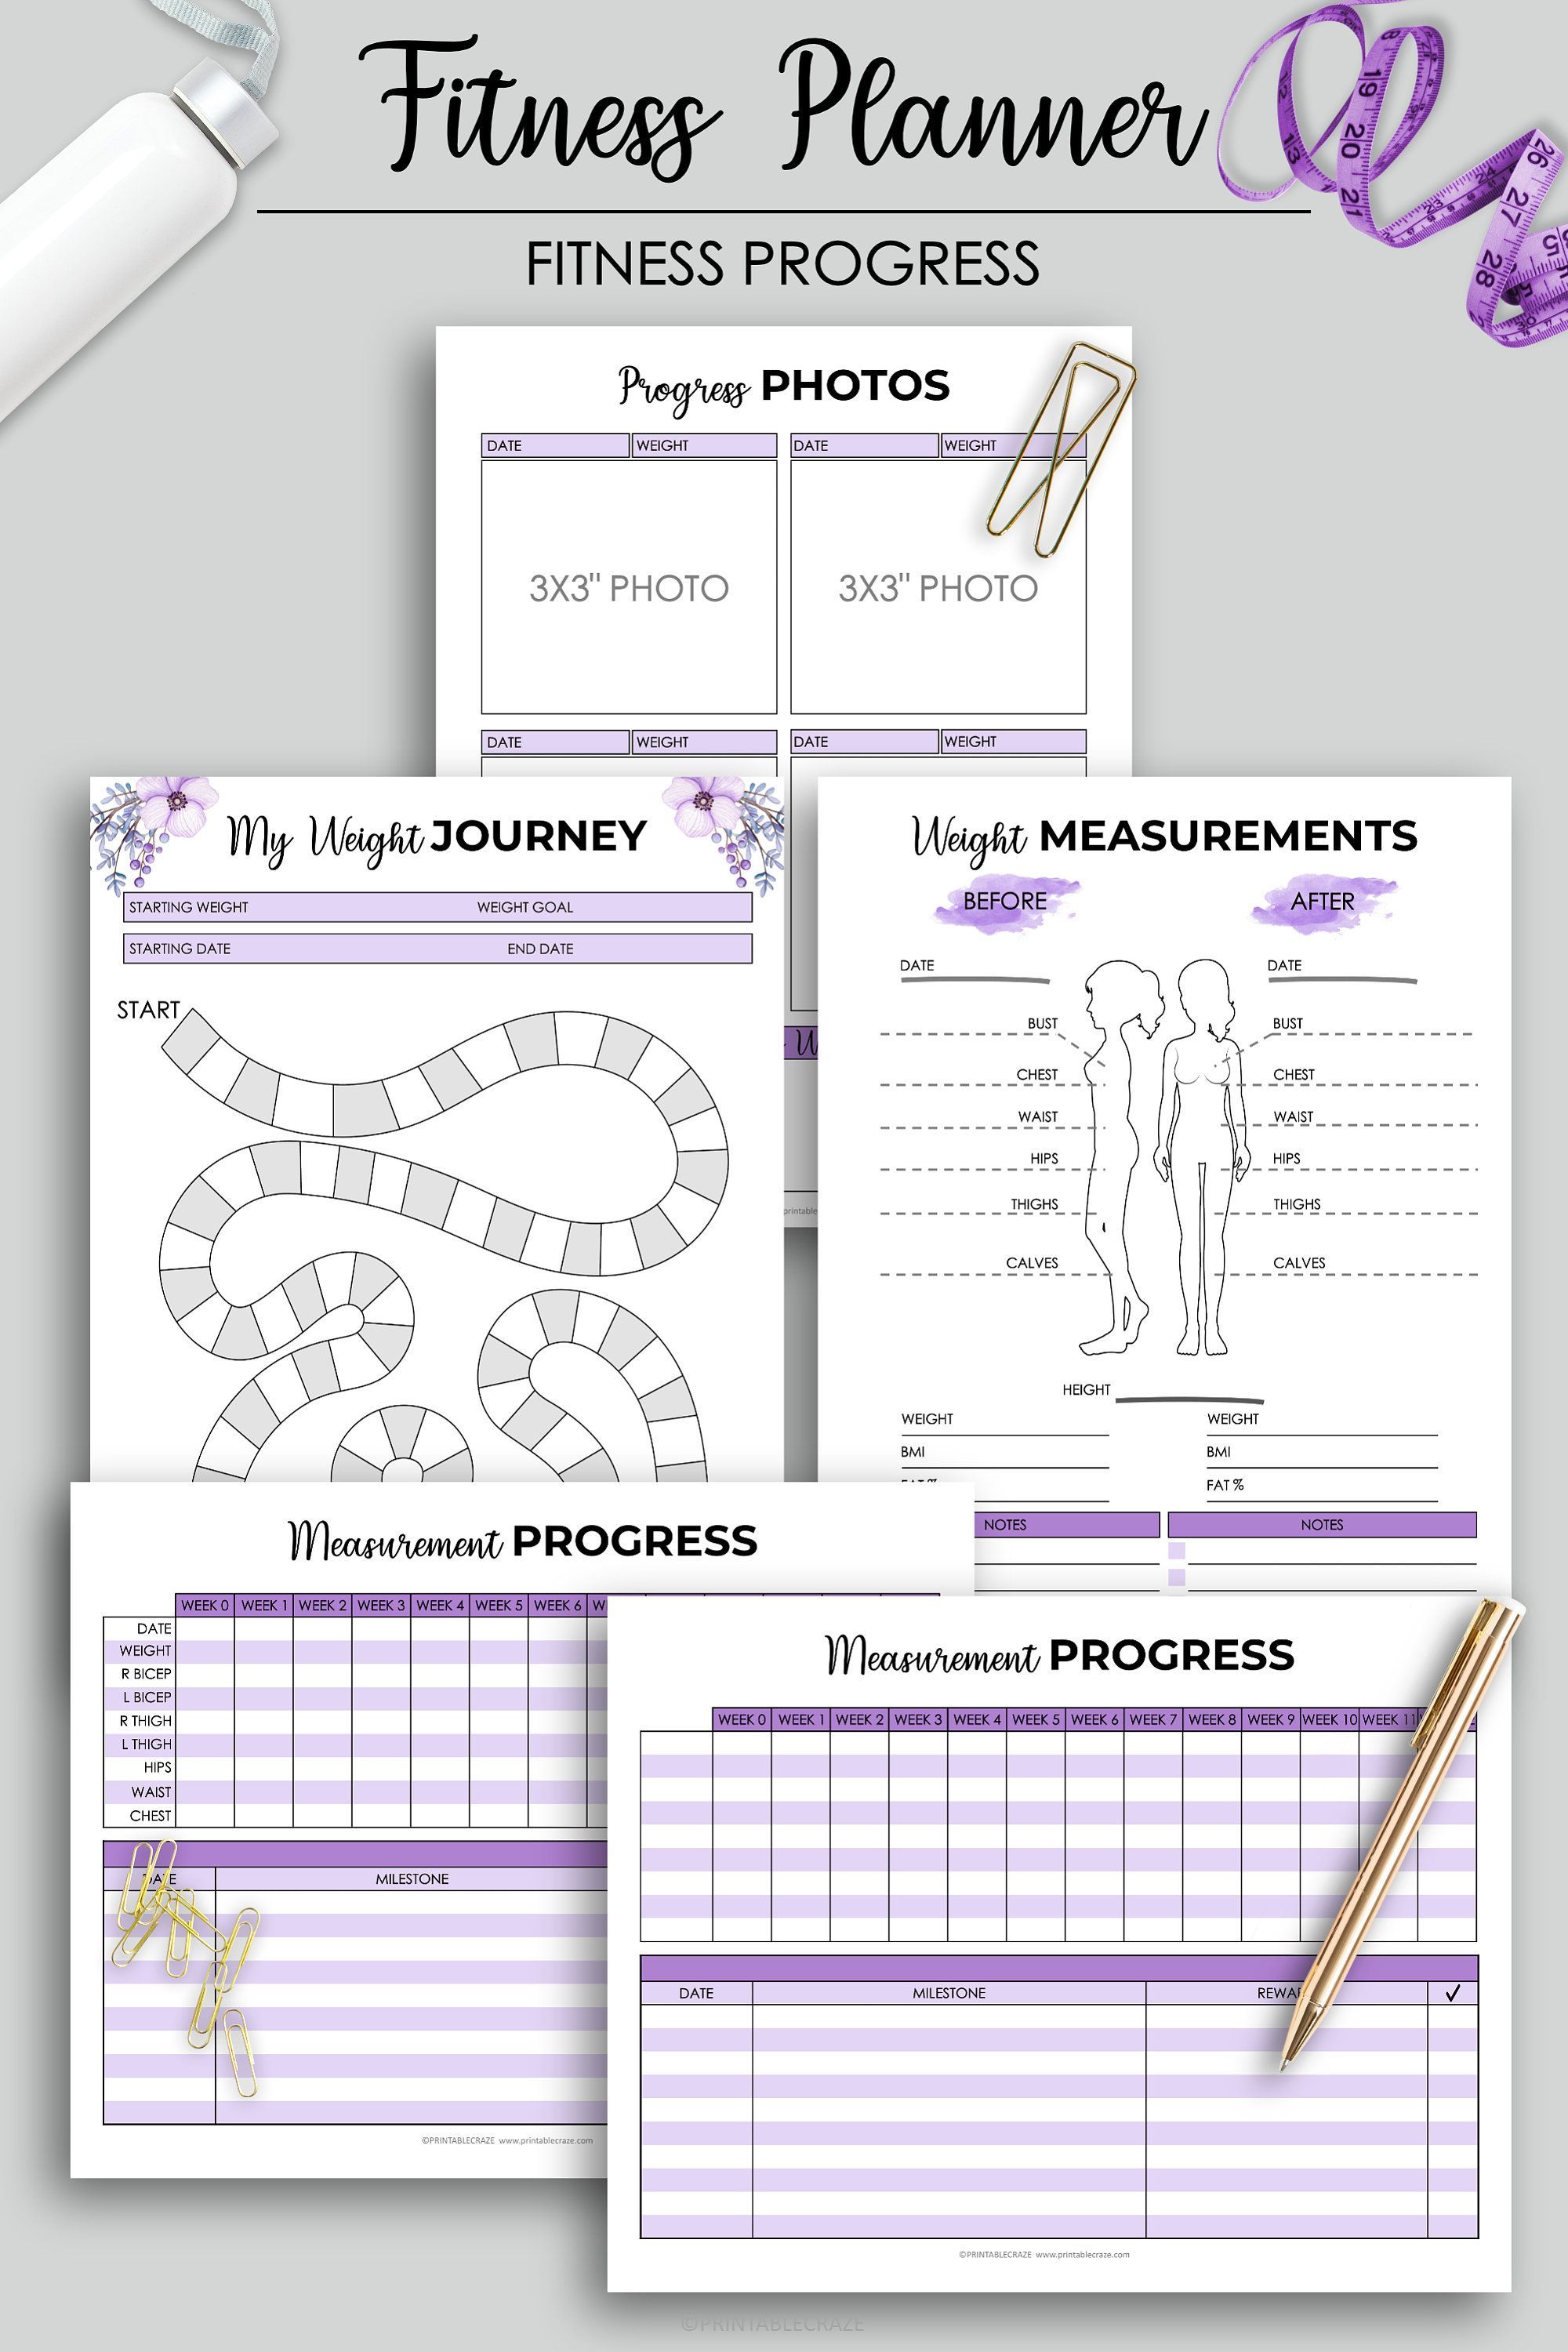 Fitness Planner Printable Weight Loss Health Planner Fitness Journal Workout Log Food Diary Calorie Tracker Daily Weight Loss Step Tracker - Fitness Planner Printable Weight Loss Health Planner Fitness Journal Workout Log Food Diary Calorie Tracker Daily Weight Loss Step Tracker -   17 fitness Planner printable ideas